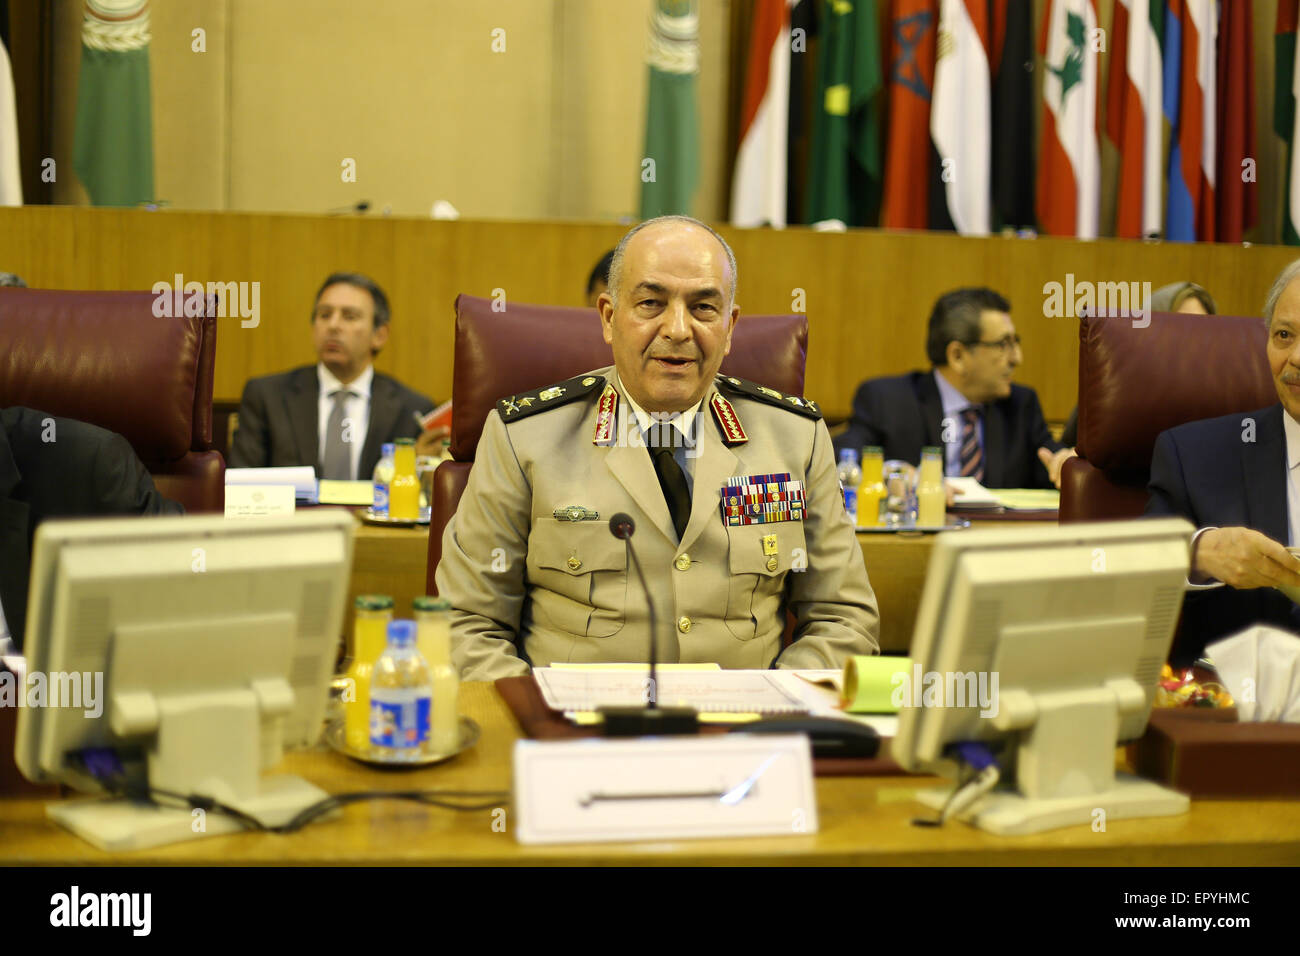 Cairo, Egypt. 23rd May, 2015. Mahmoud Hegazy, Egyptian Chief of Staff, attends the meeting of army chiefs from Arab nations at the headquarters of Arab League in Cairo, capital of Egypt, on May 23, 2015. Military chiefs from Arab countries held a meeting on Saturday for the formation of a joint Arab military force to combat terrorism and to protect security. Credit:  Ahmed Gomaa/Xinhua/Alamy Live News Stock Photo